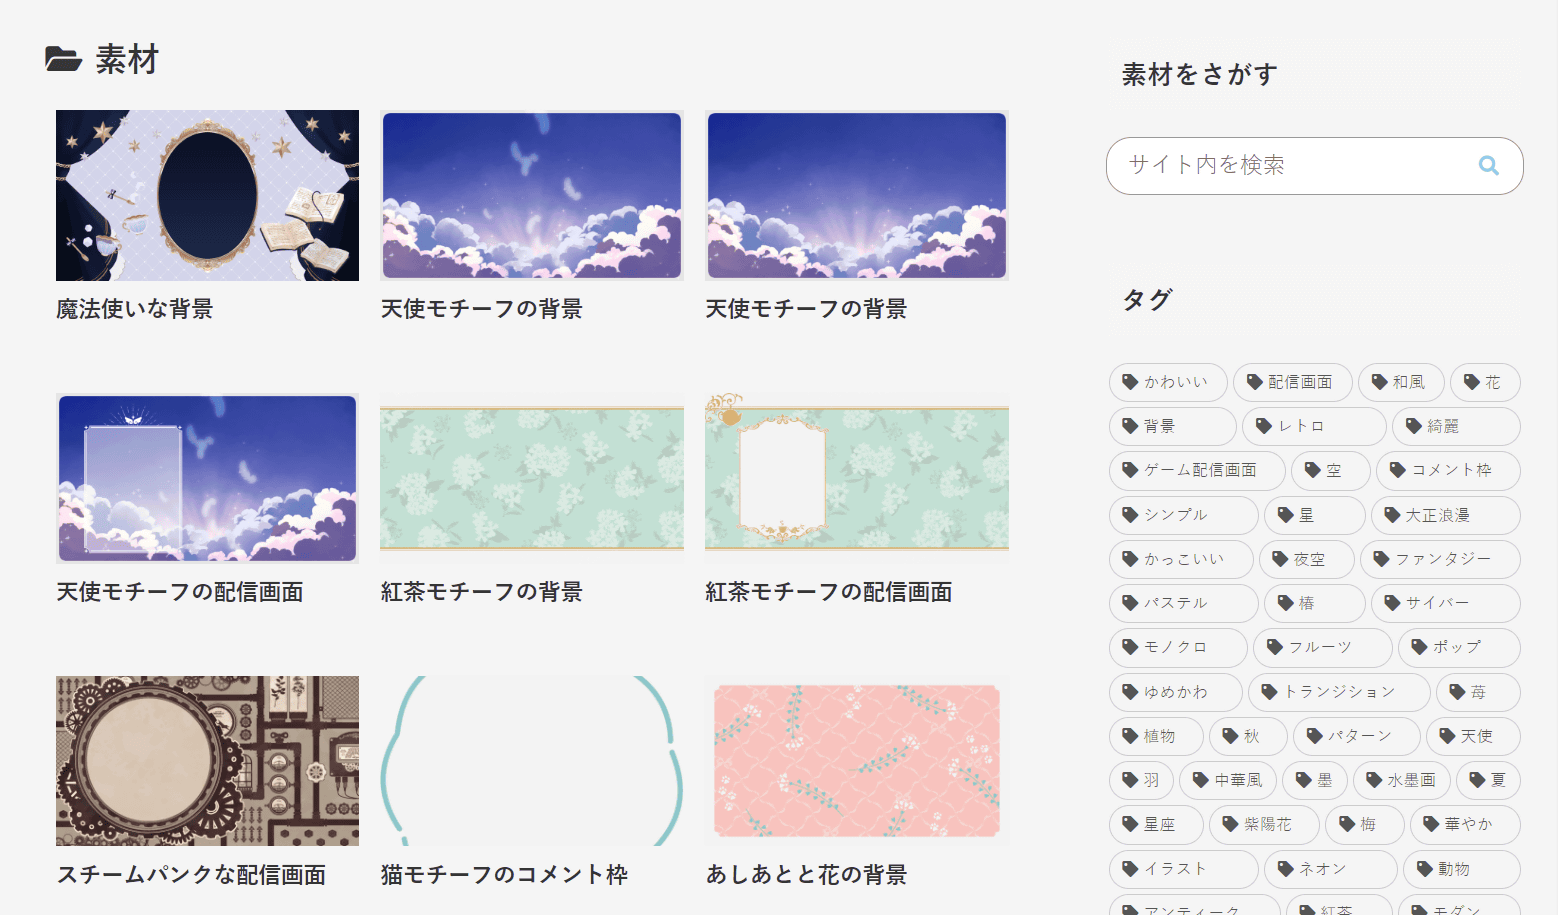 Material Shop Airisu Which Summarizes Free Materials That Can Be Used For Free Distribution Videos And Illustrations That Can Be Used For Commercial Purposes Gigazine